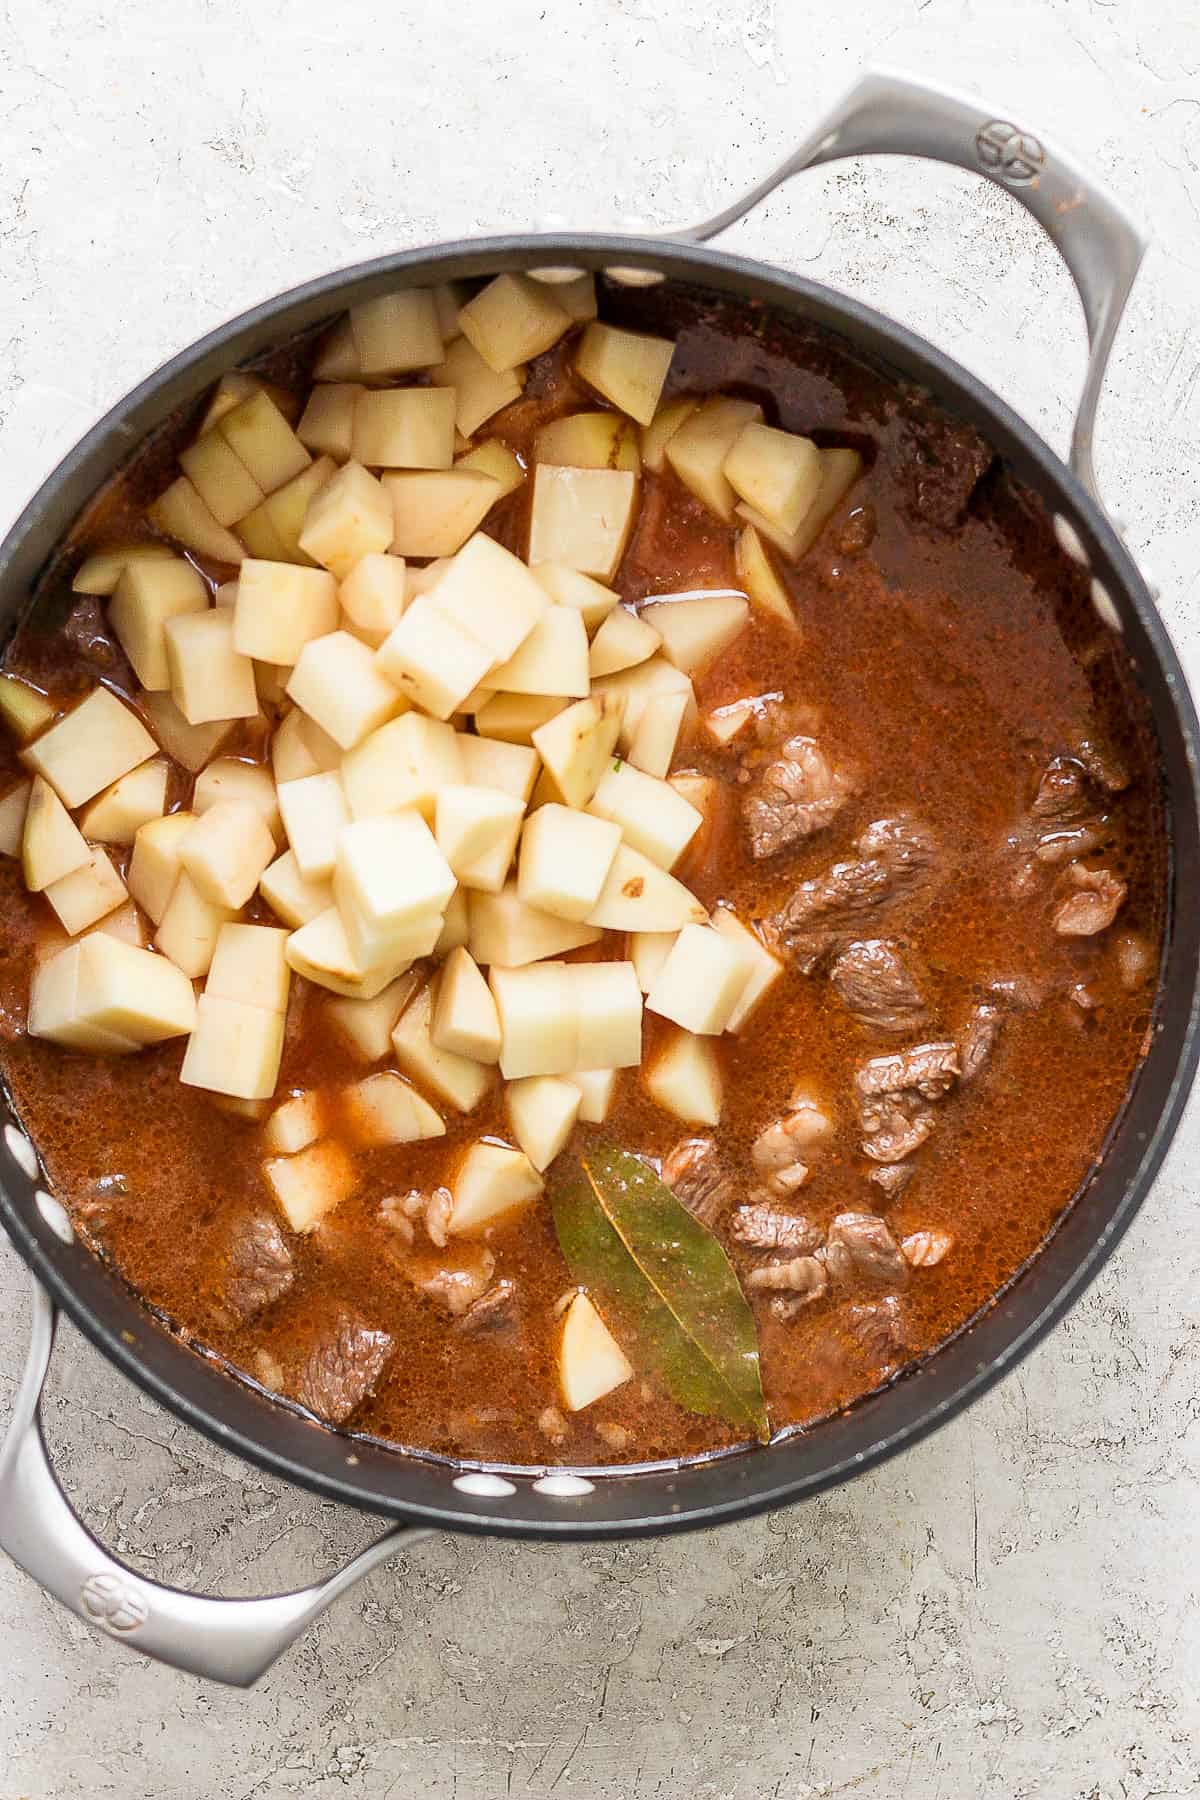 Carne con papas cooking in a pot with diced potatoes.